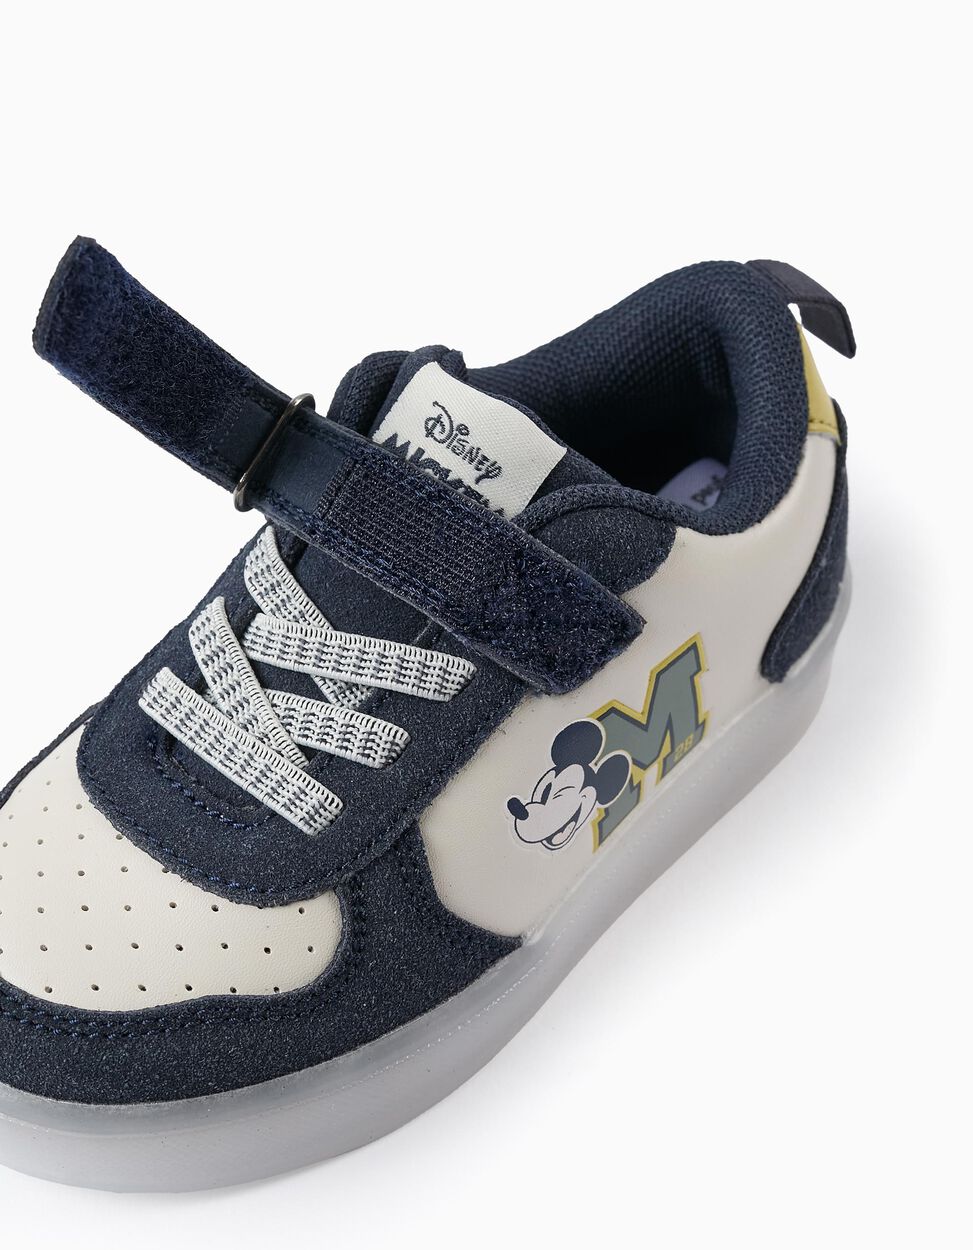 Buy Online Light-up Trainers for Baby Boys 'Mickey', White/Blue/Yellow